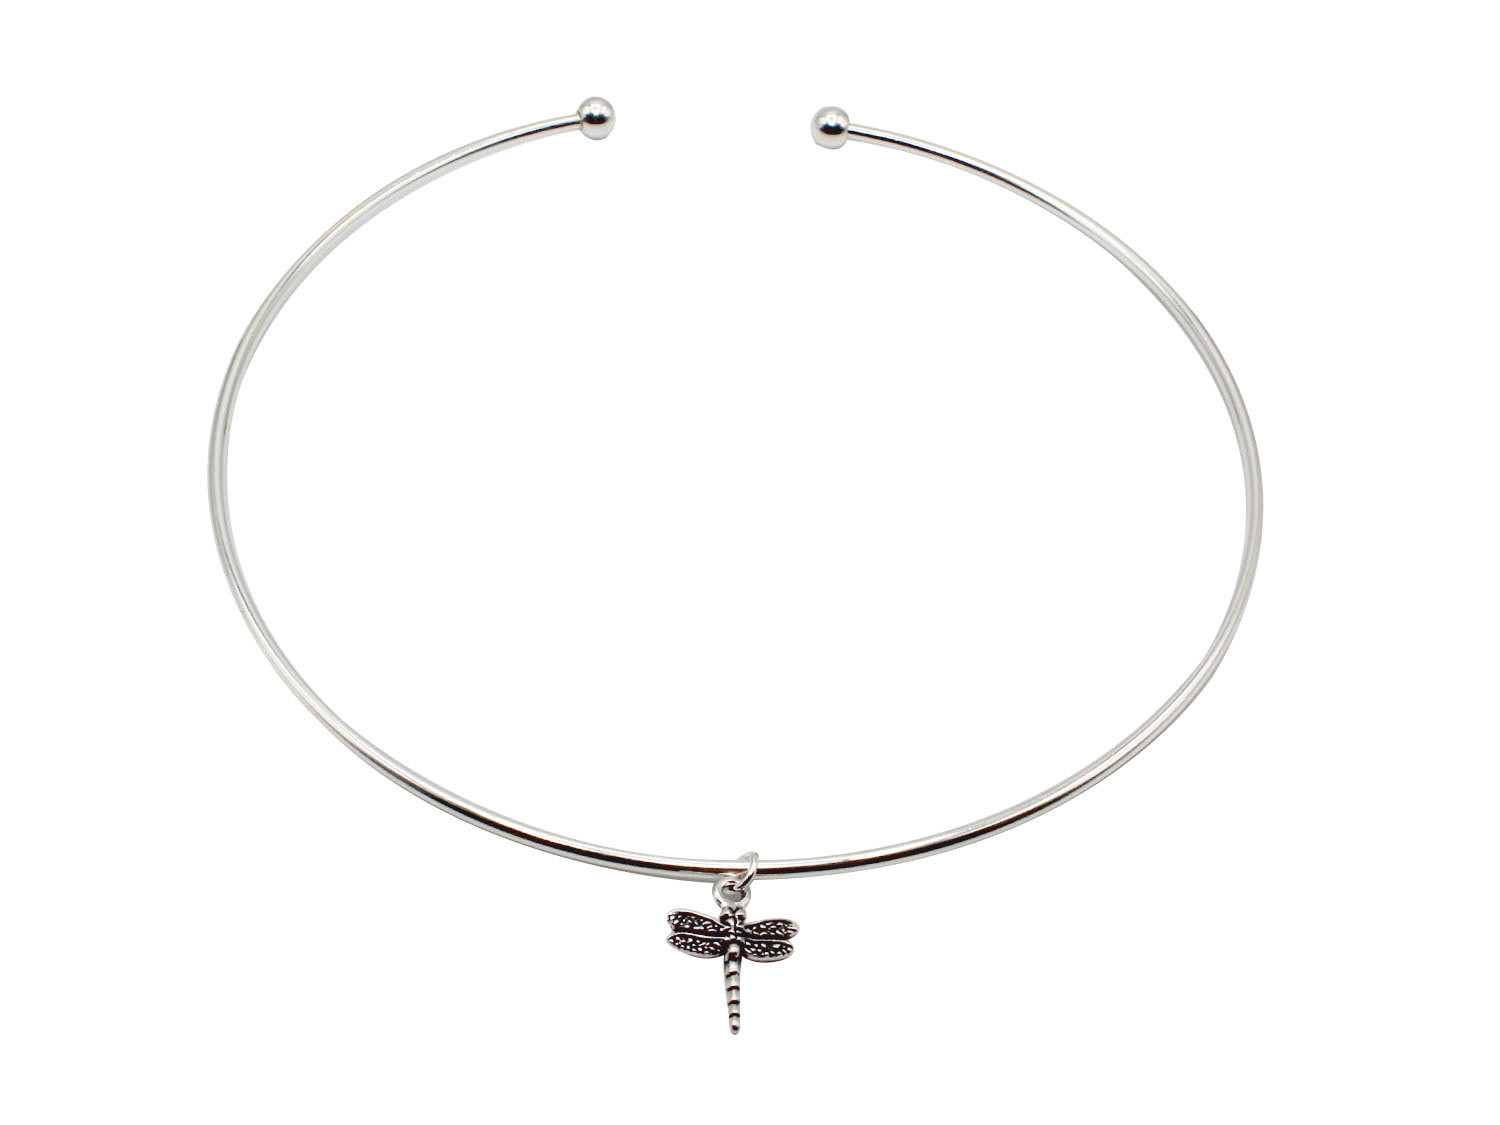 Silver Choker with Dragonfly Antique Silver Charm